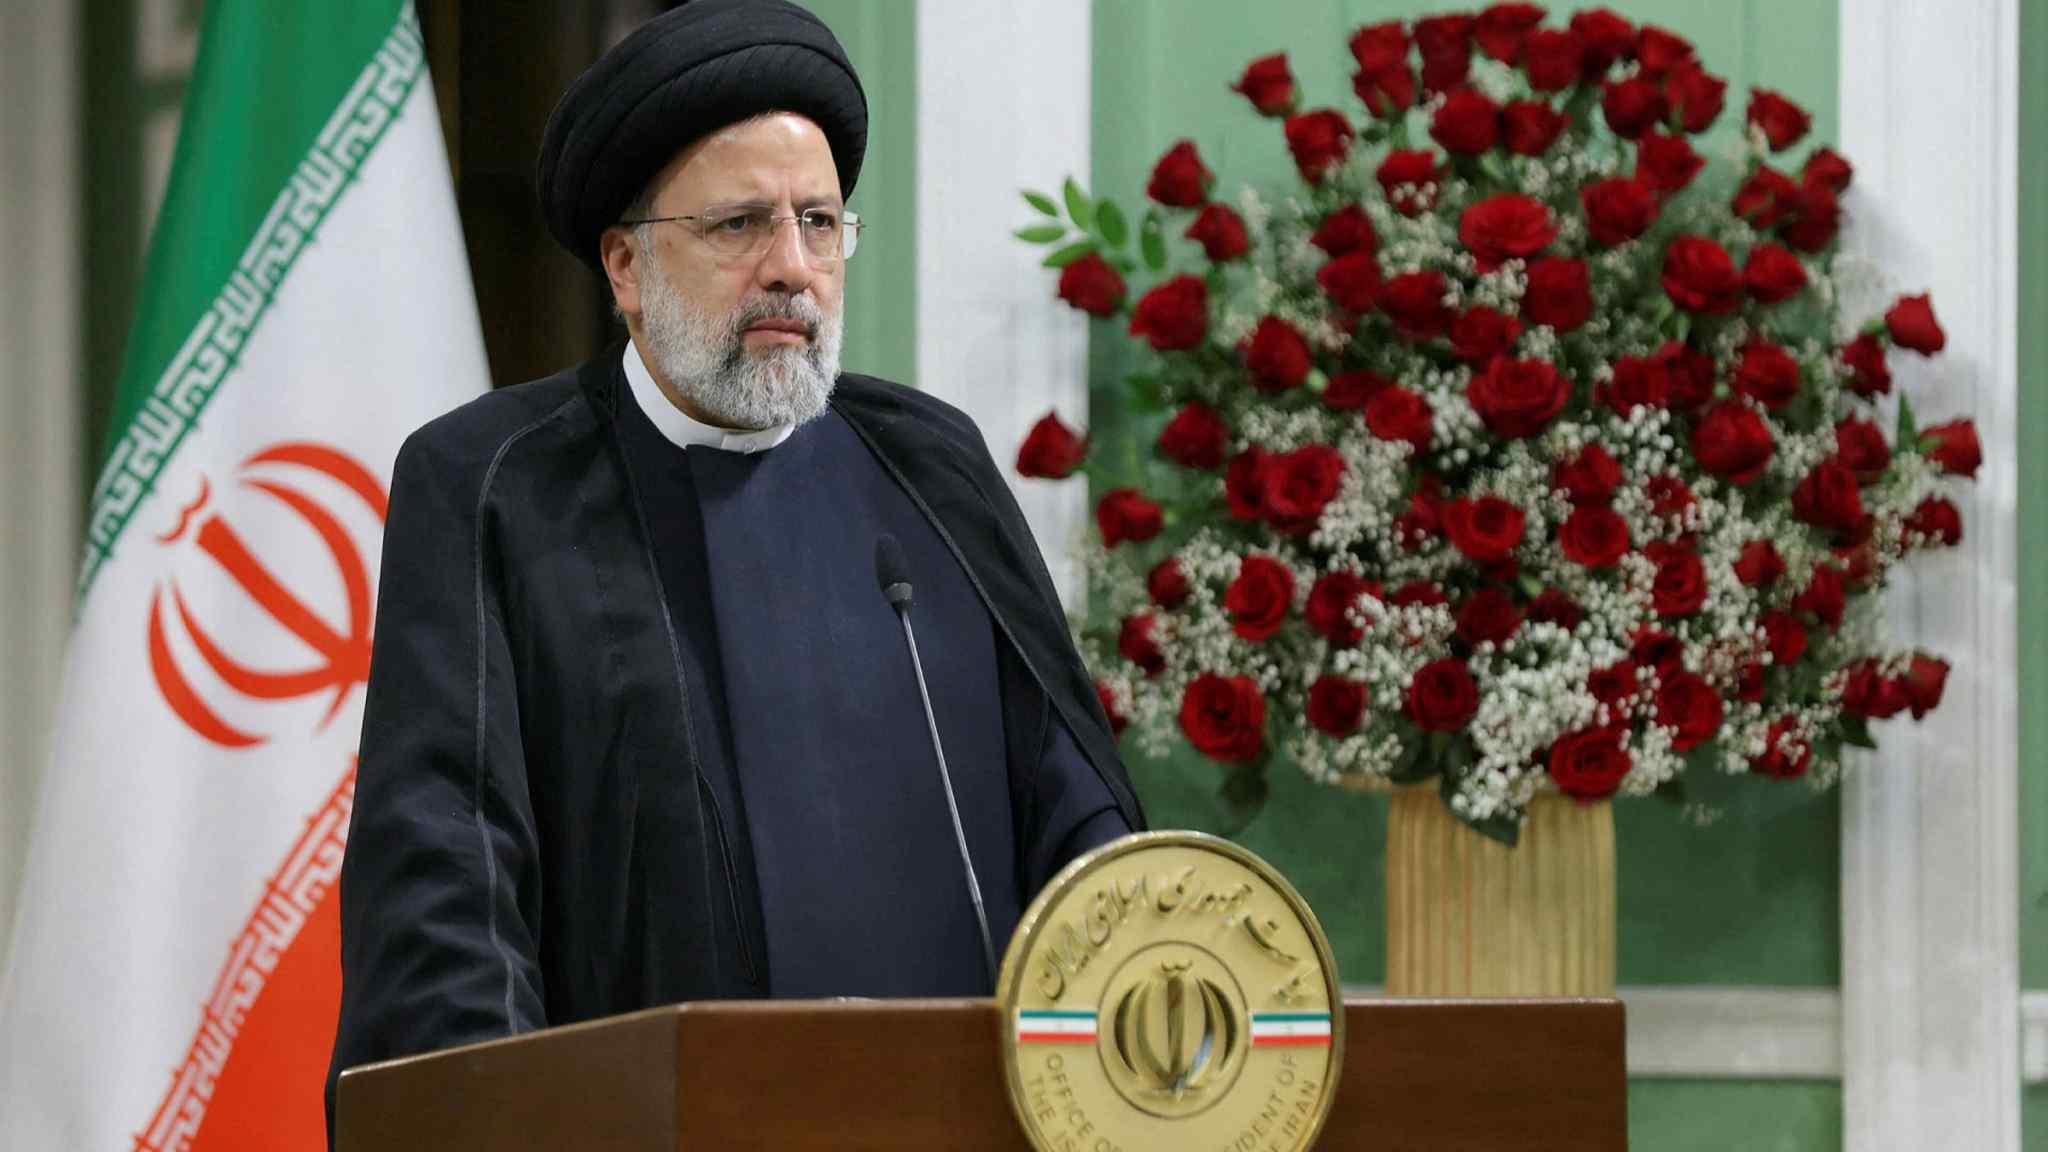 Iranian hardliners back Raisi’s low-key approach despite protests